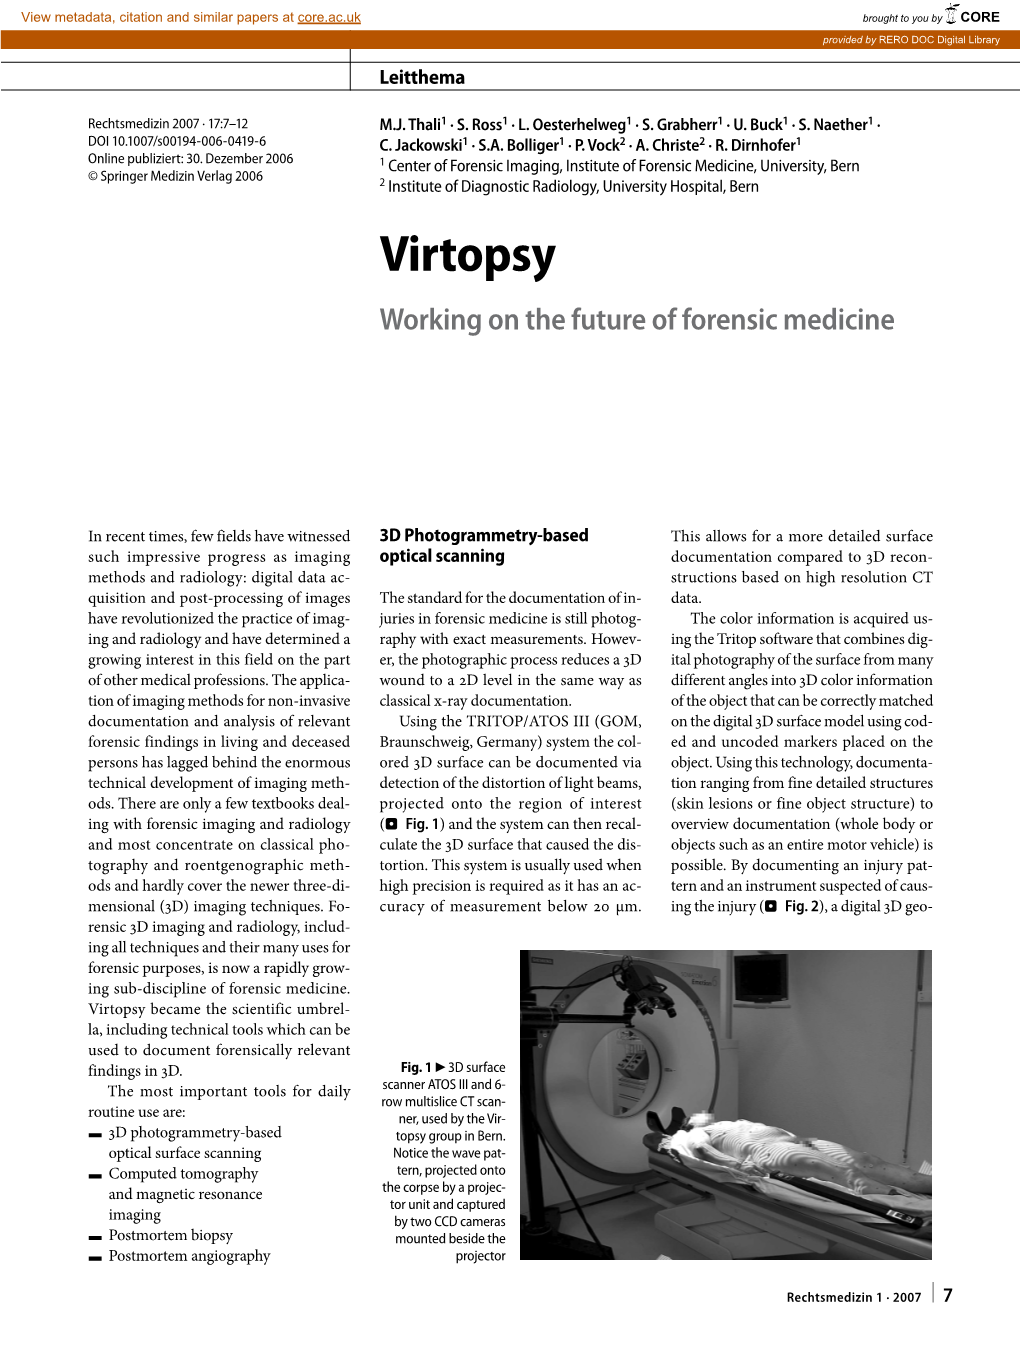 Virtopsy Working on the Future of Forensic Medicine